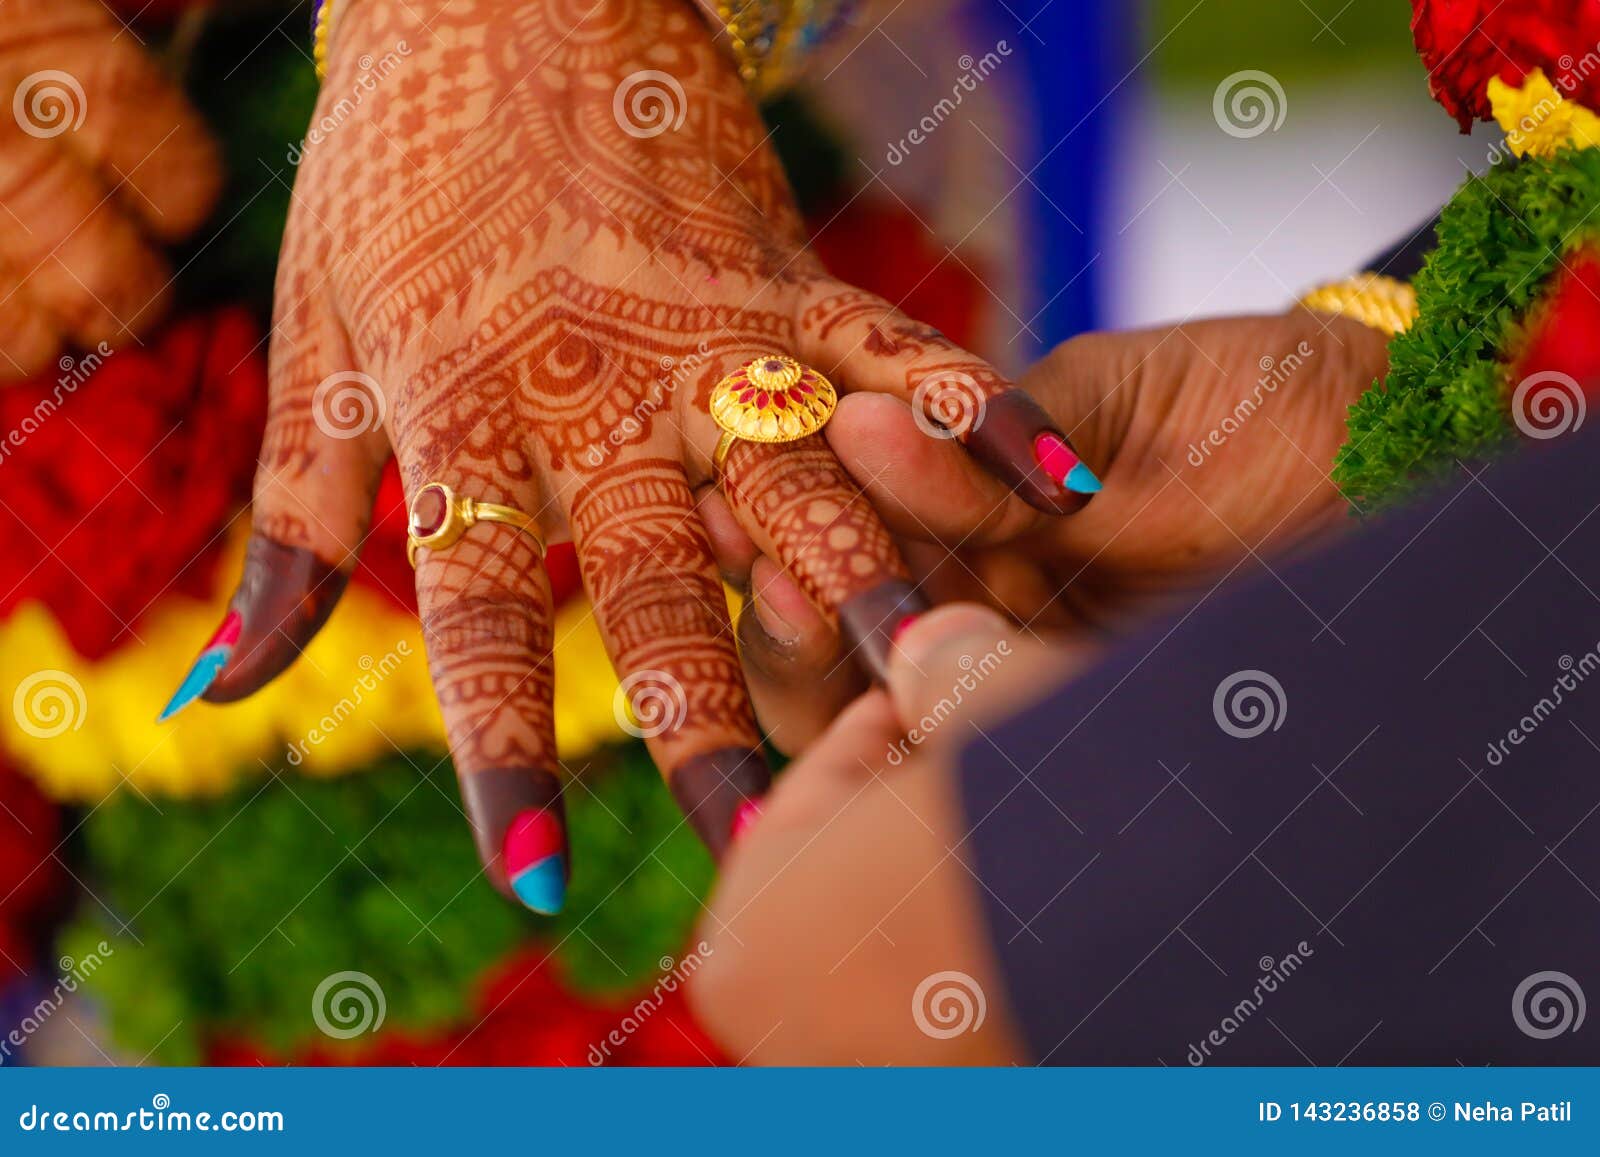 Engagement Ring In An Indian Wedding High-Res Stock Photo - Getty Images